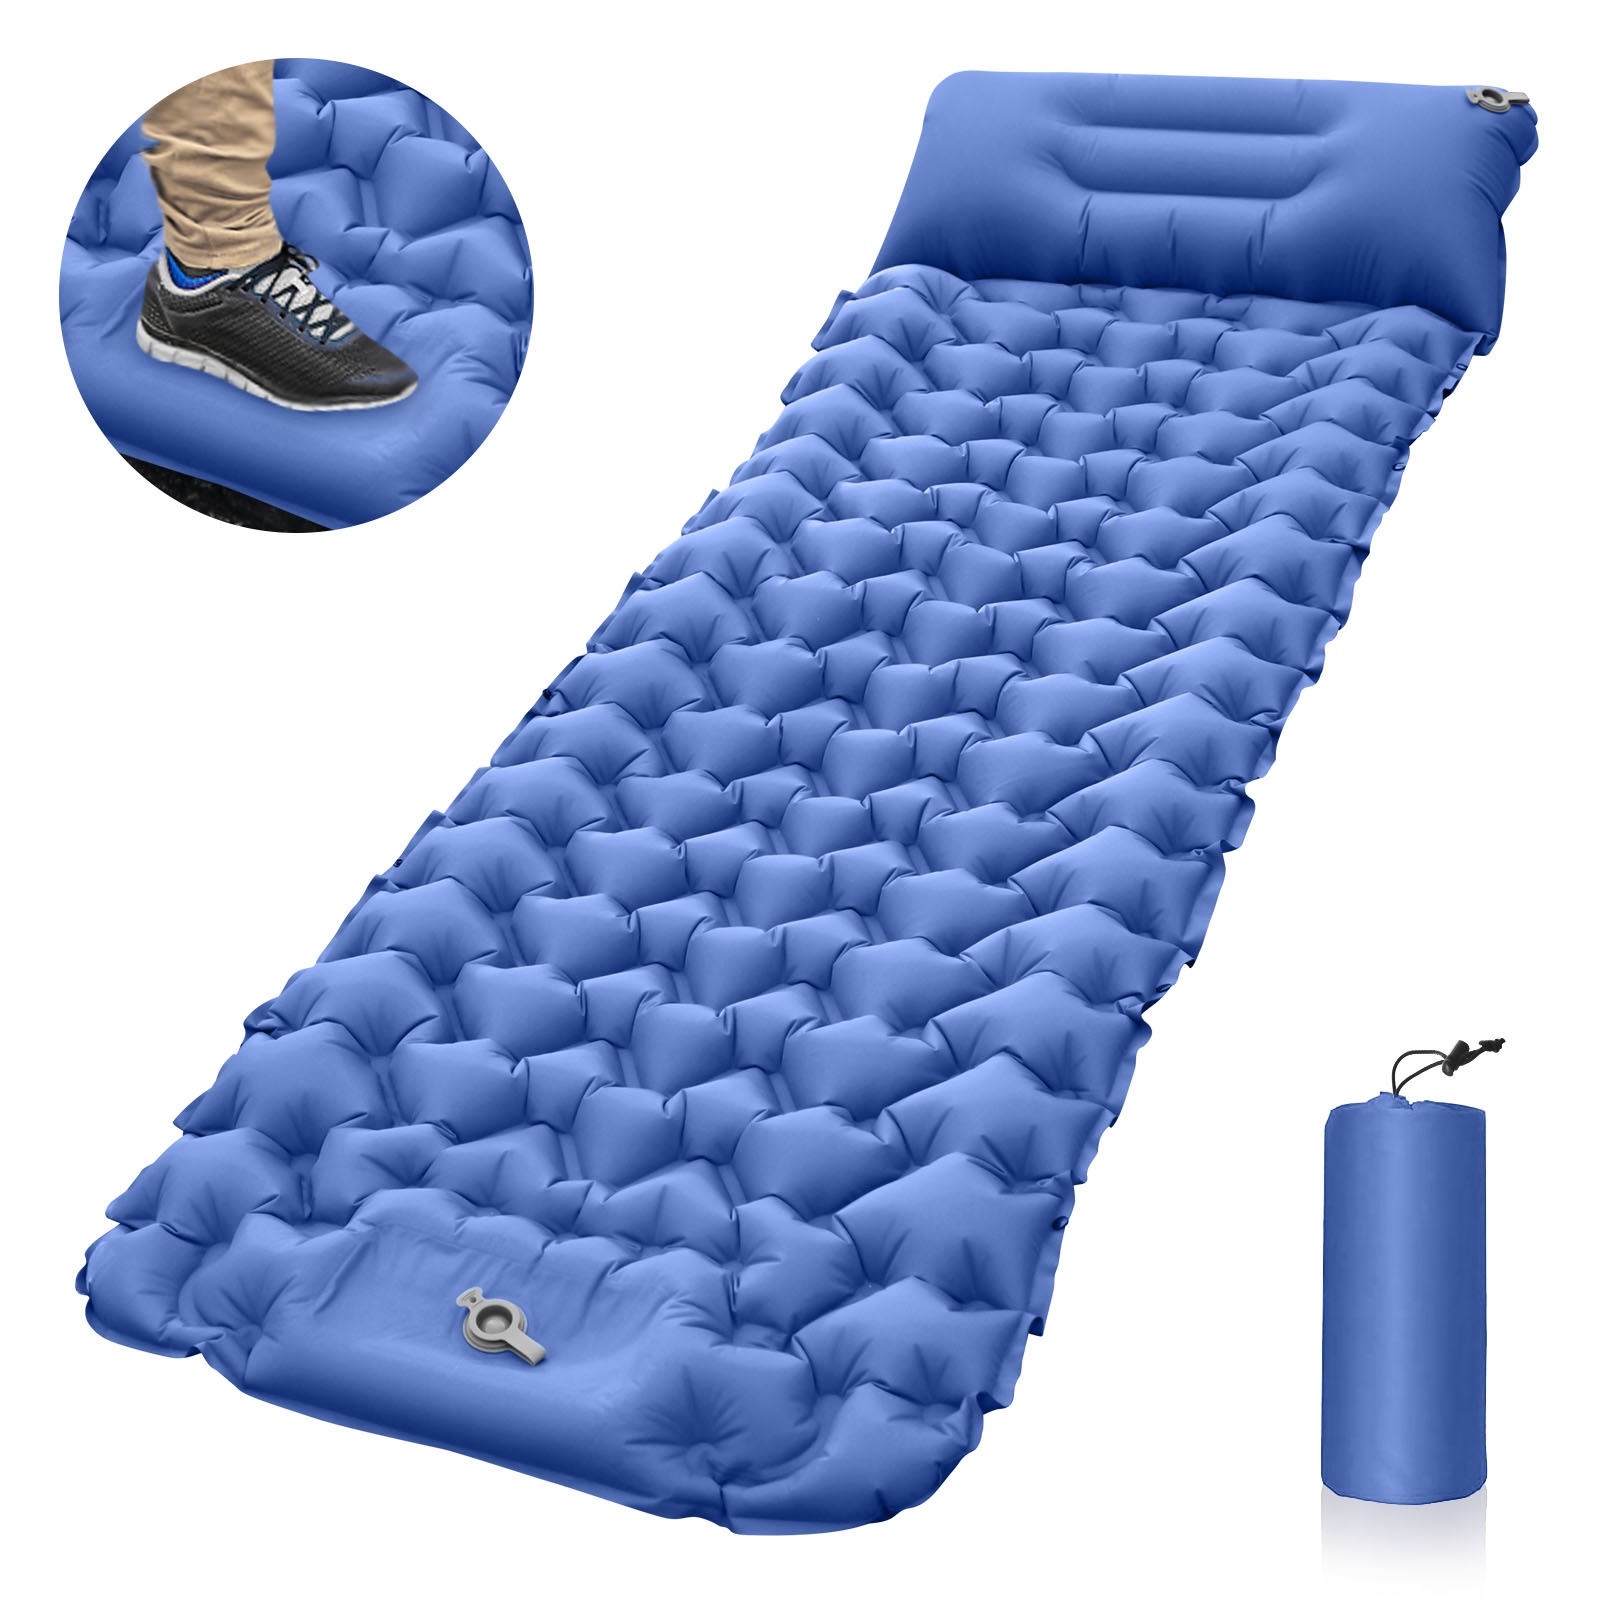 Single Person Outdoor Sleeping Self Inflatable Air Mattress for Camping